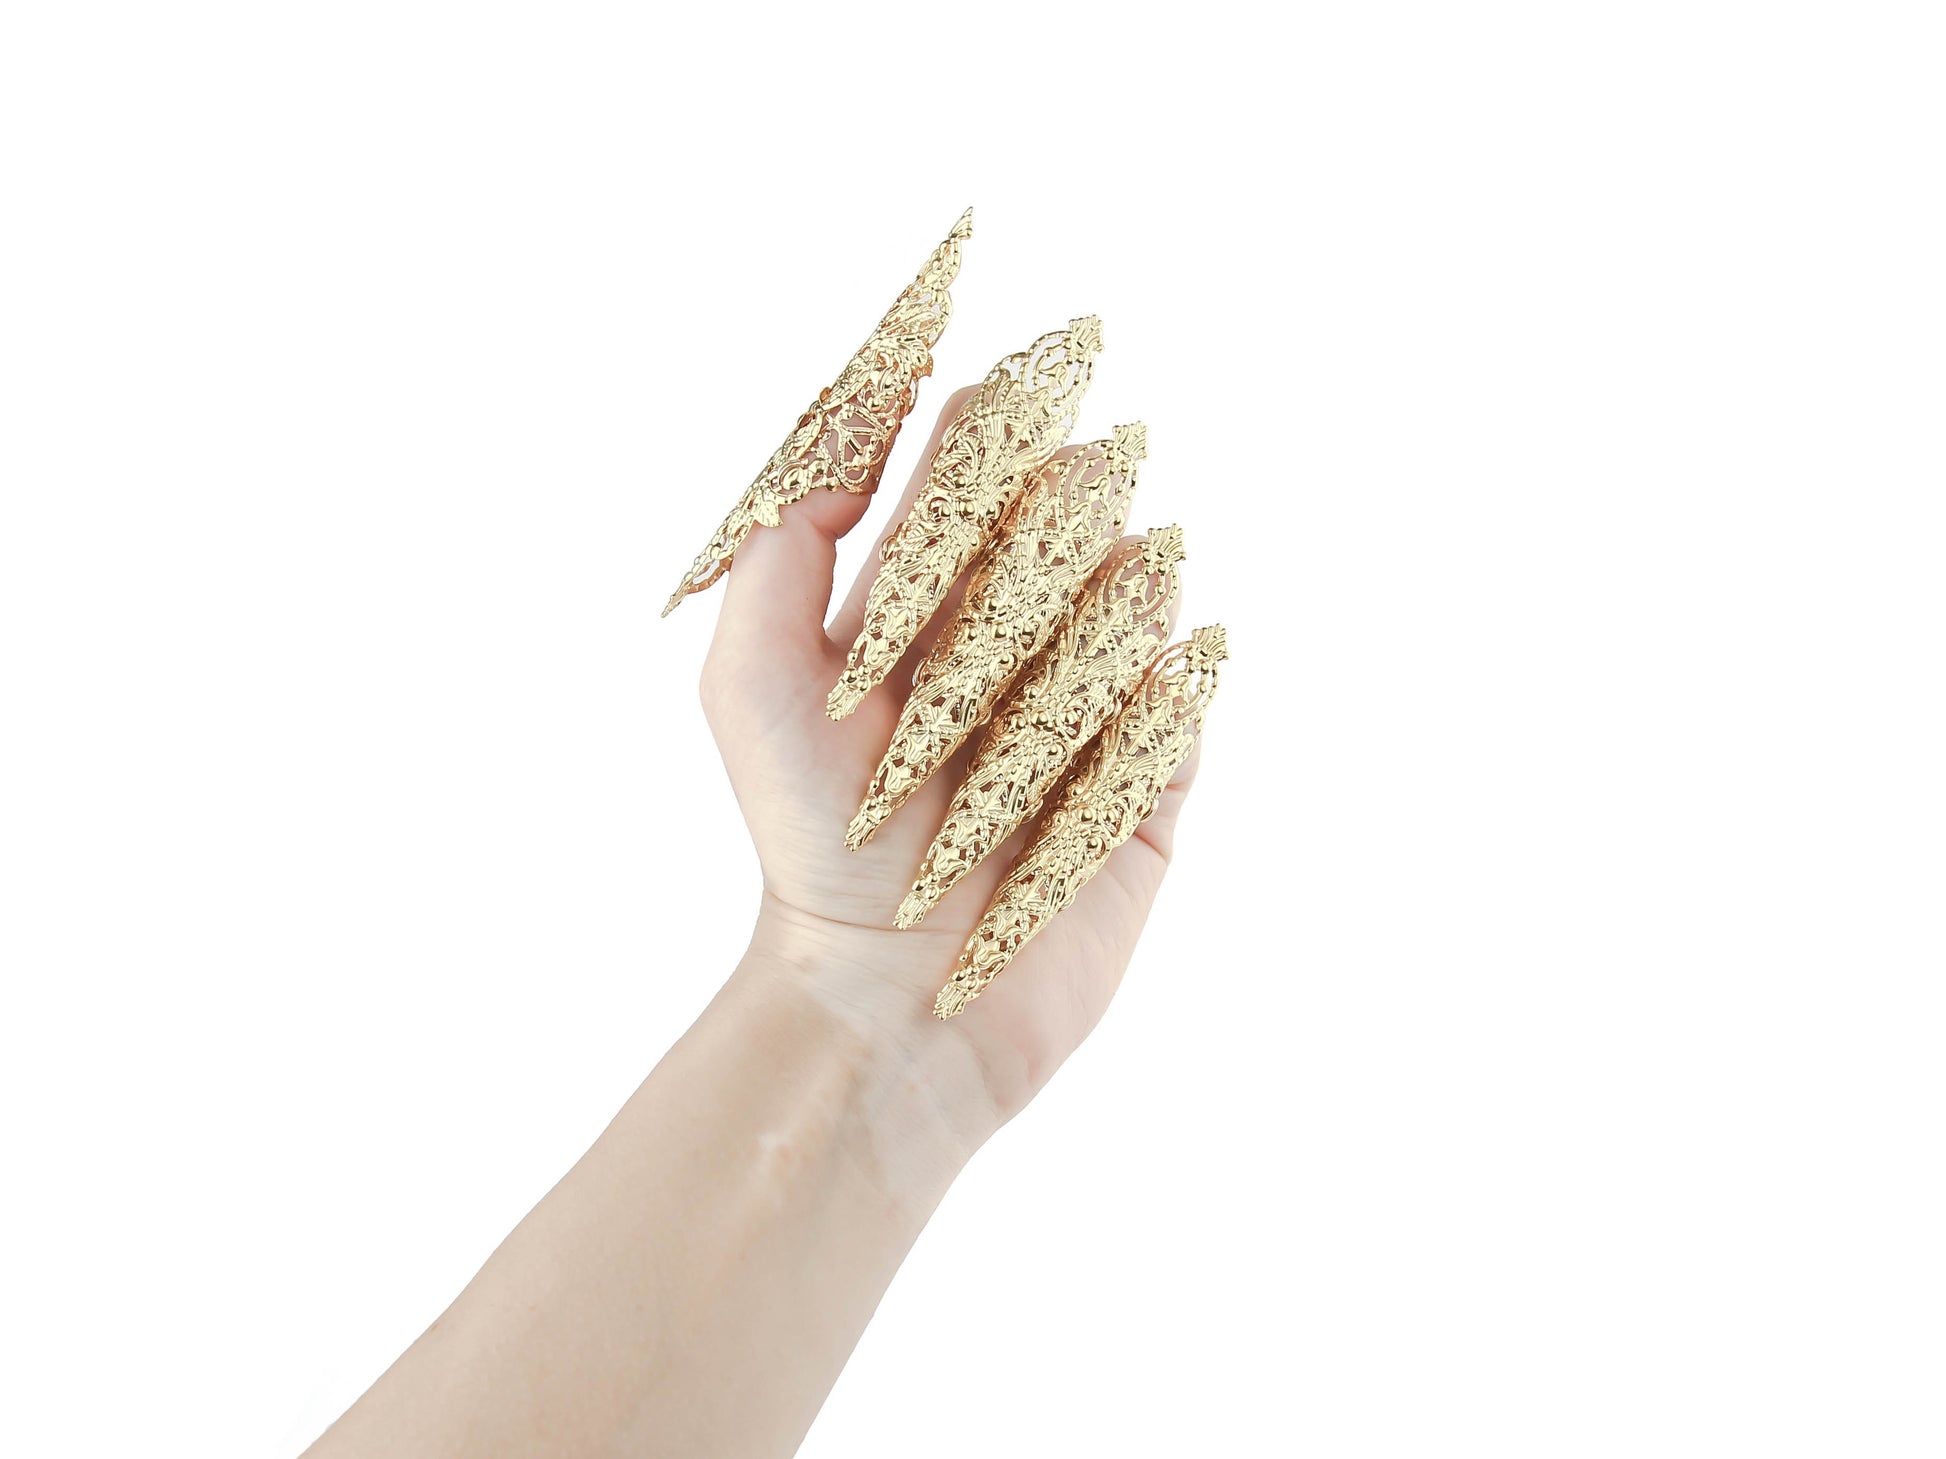 Showcasing Myril Jewels' signature full hand set of extra-long gold nail claw rings, this image captures the essence of neo-gothic finesse. Ideal for those embracing gothic-chic, whimsigoth, or witchcore styles, these claws make for an unforgettable accessory for Halloween, festivals, or as a striking gift.